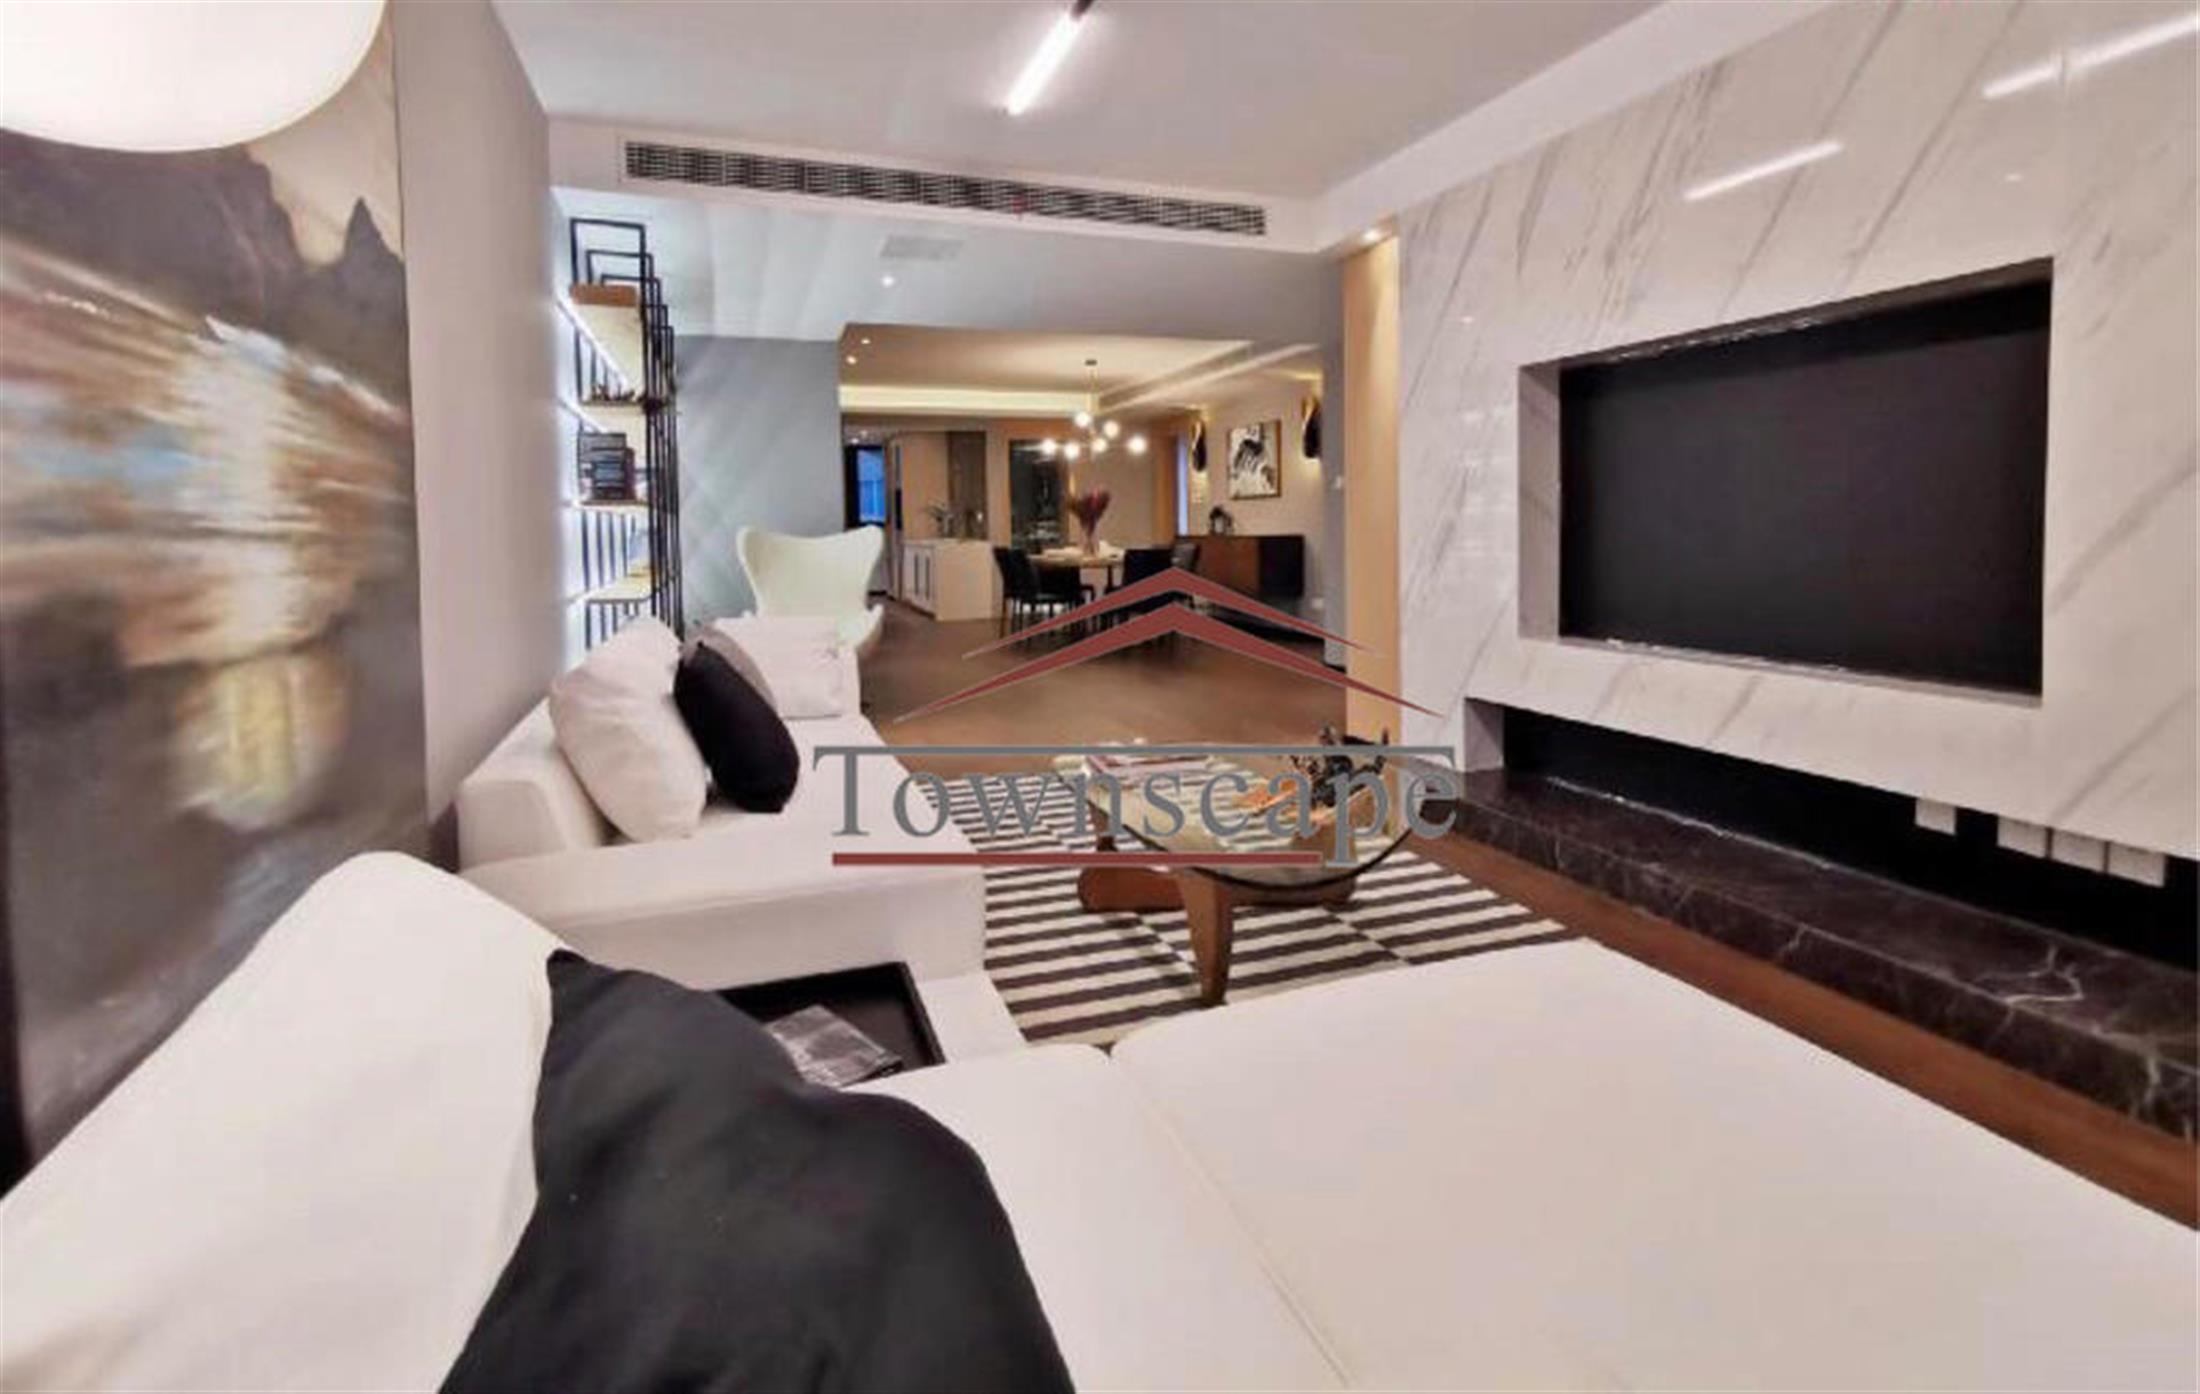 Big TV New Gorgeous Spacious Modern High-Quality Apt nr SH Library for Rent